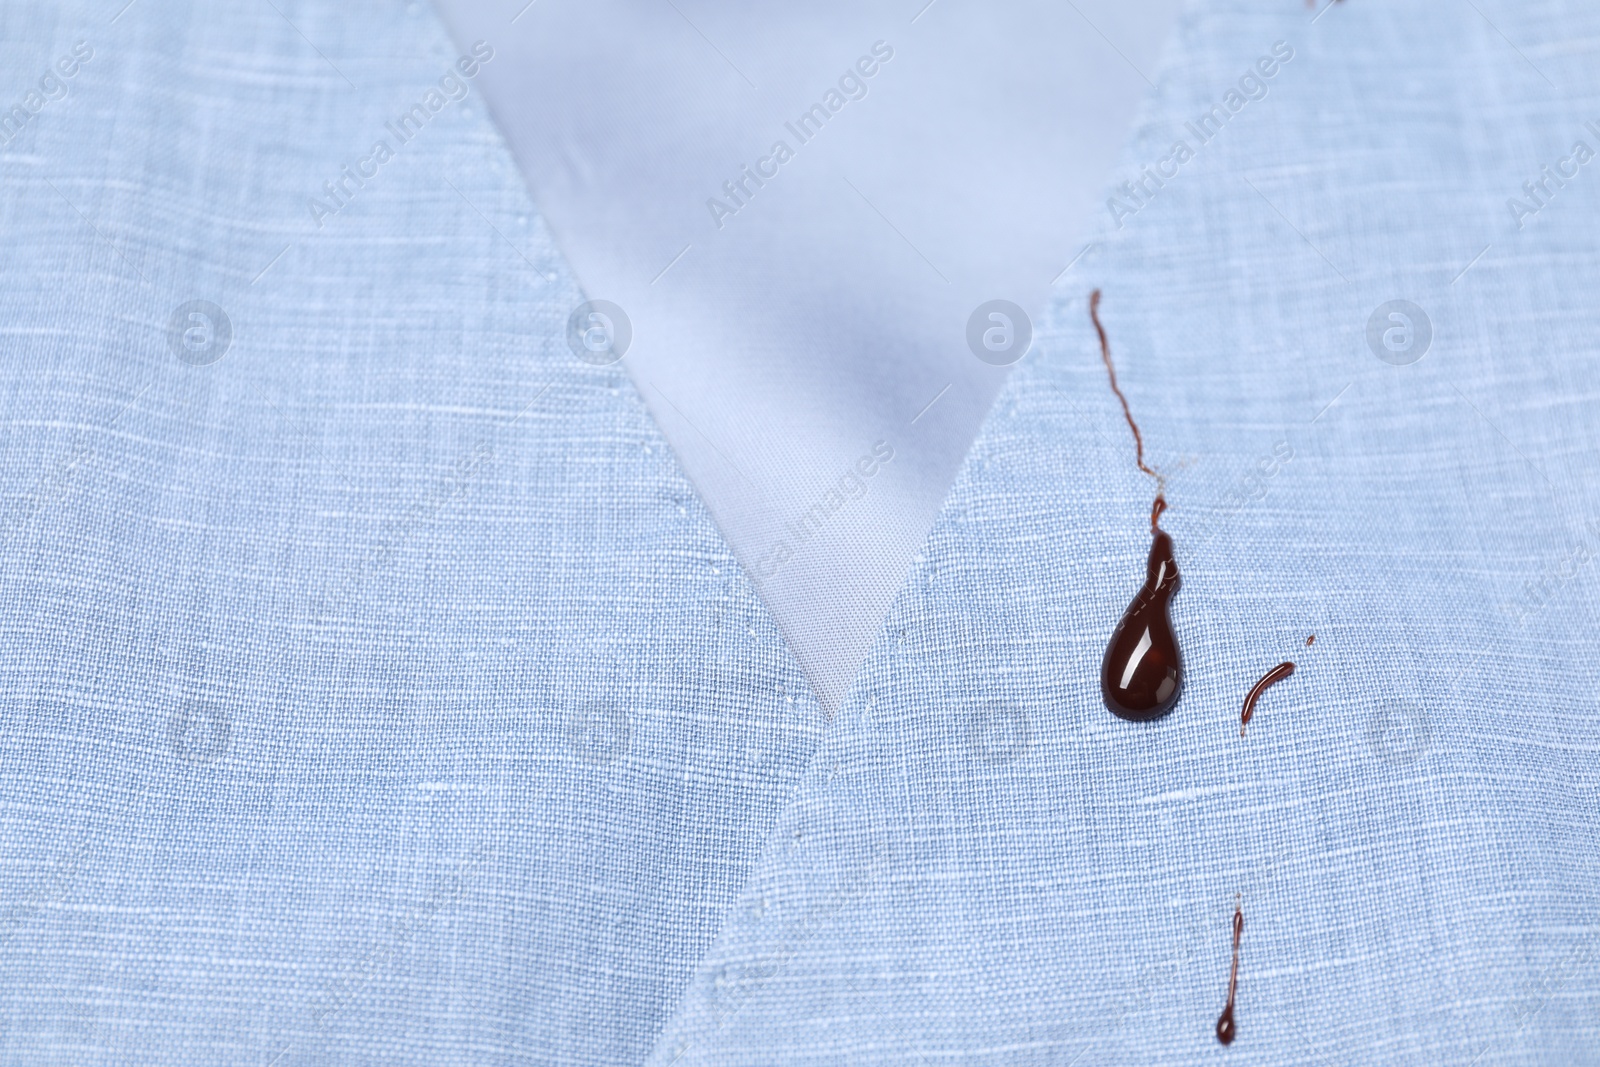 Photo of Dirty vest with drops of chocolate, closeup view